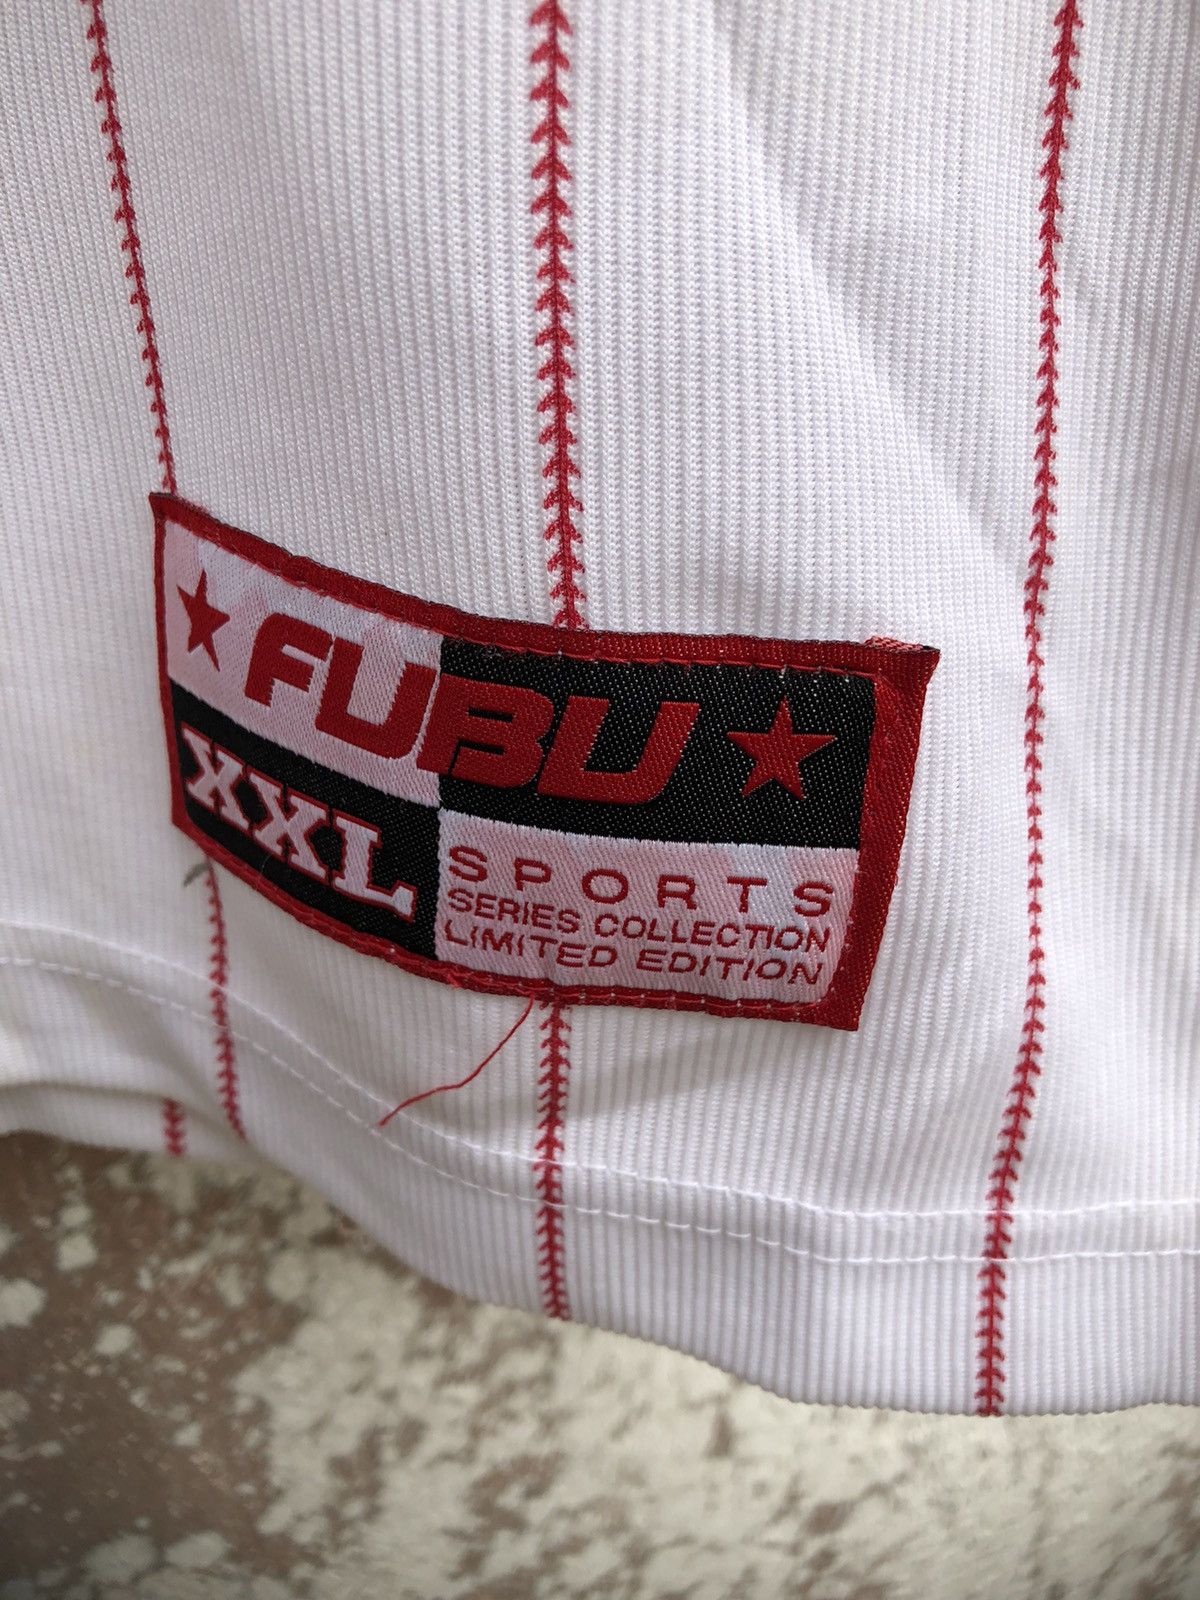 Vintage Limited Fubu 05 Rare Jersey Collection - 7